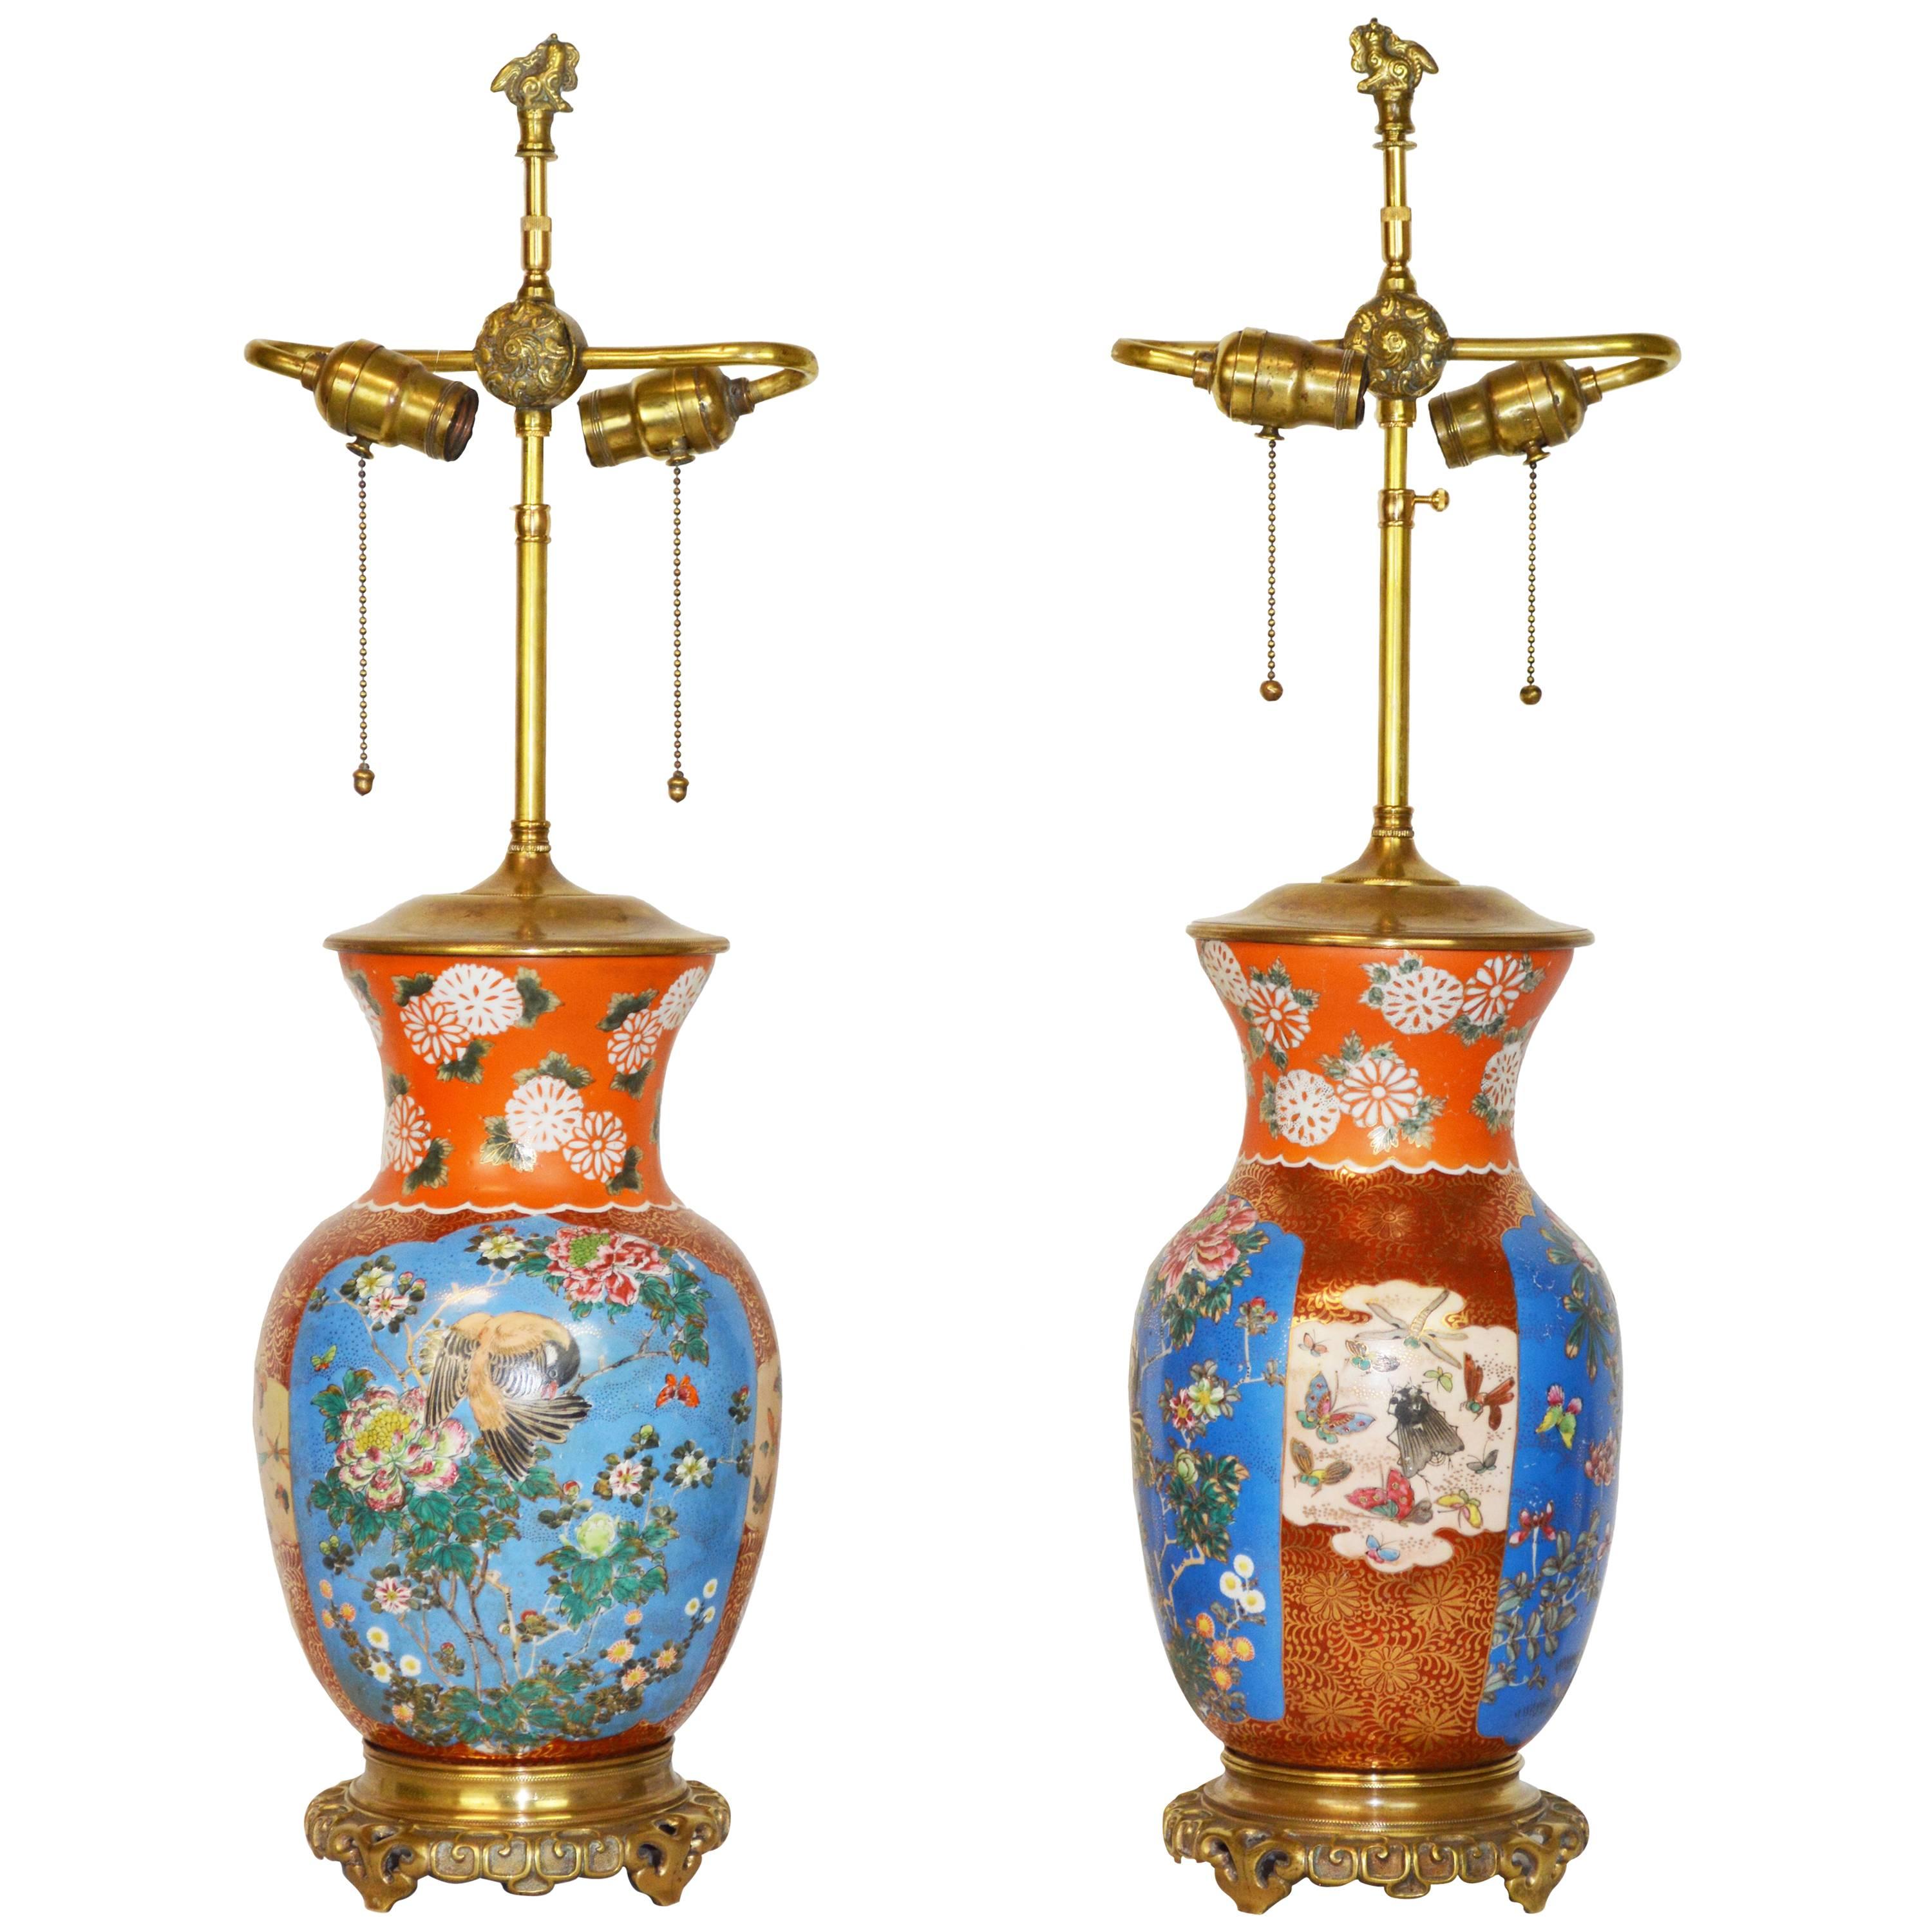 Pair of 19th Century Japanese Porcelain Lamps